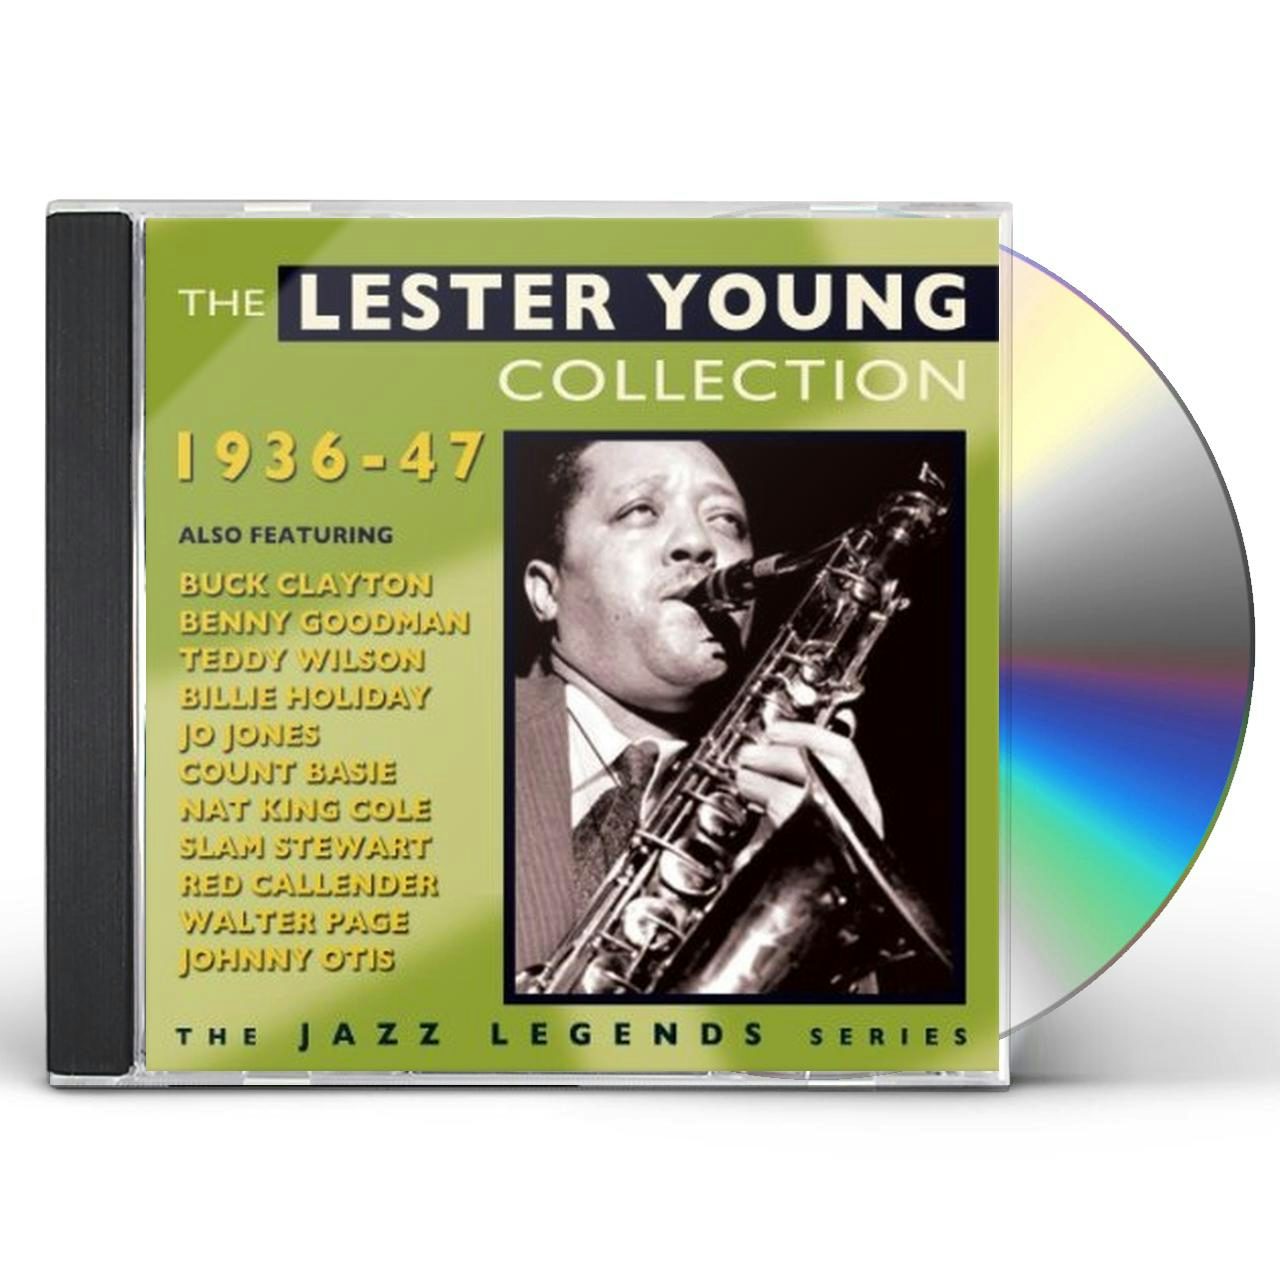 The Lester Young Collection 1936-47 